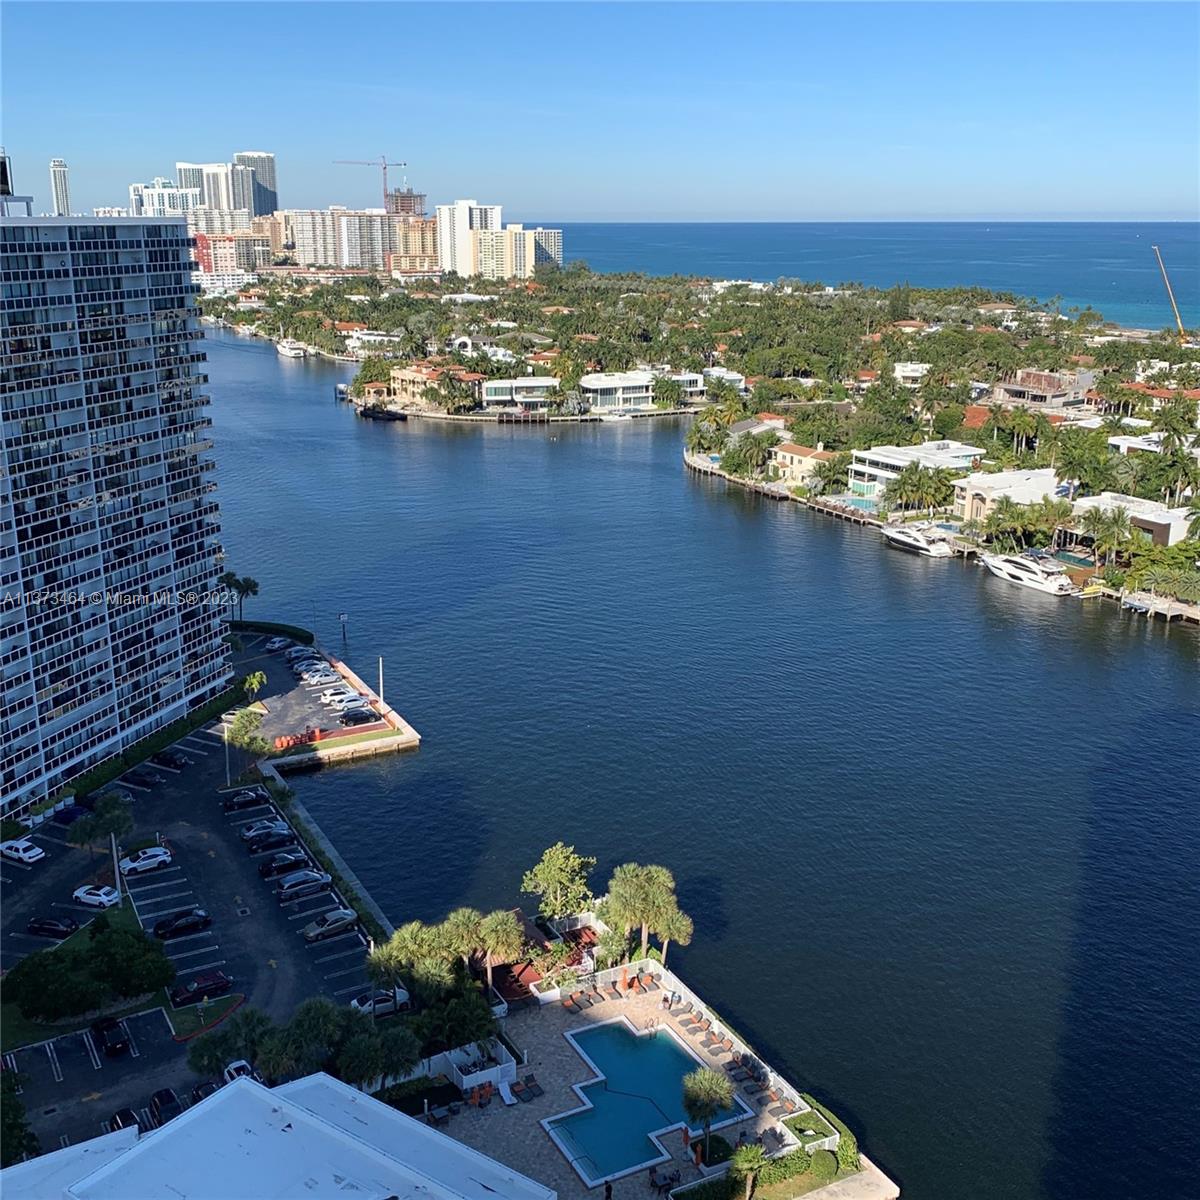 Designer furnished, 2 bed + Den + Maid's quarter in beautiful Hamptons South.  Flow thru apt with Ocean, Intracoastal, Pool & Golf Course view. 2 swimming pools, 2 gyms, Restaurant, Movie Theater, Tennis, Barbecue.
Valet 24 hrs. Close to Aventura Mall & house of worship. Available April 1st, 2024.